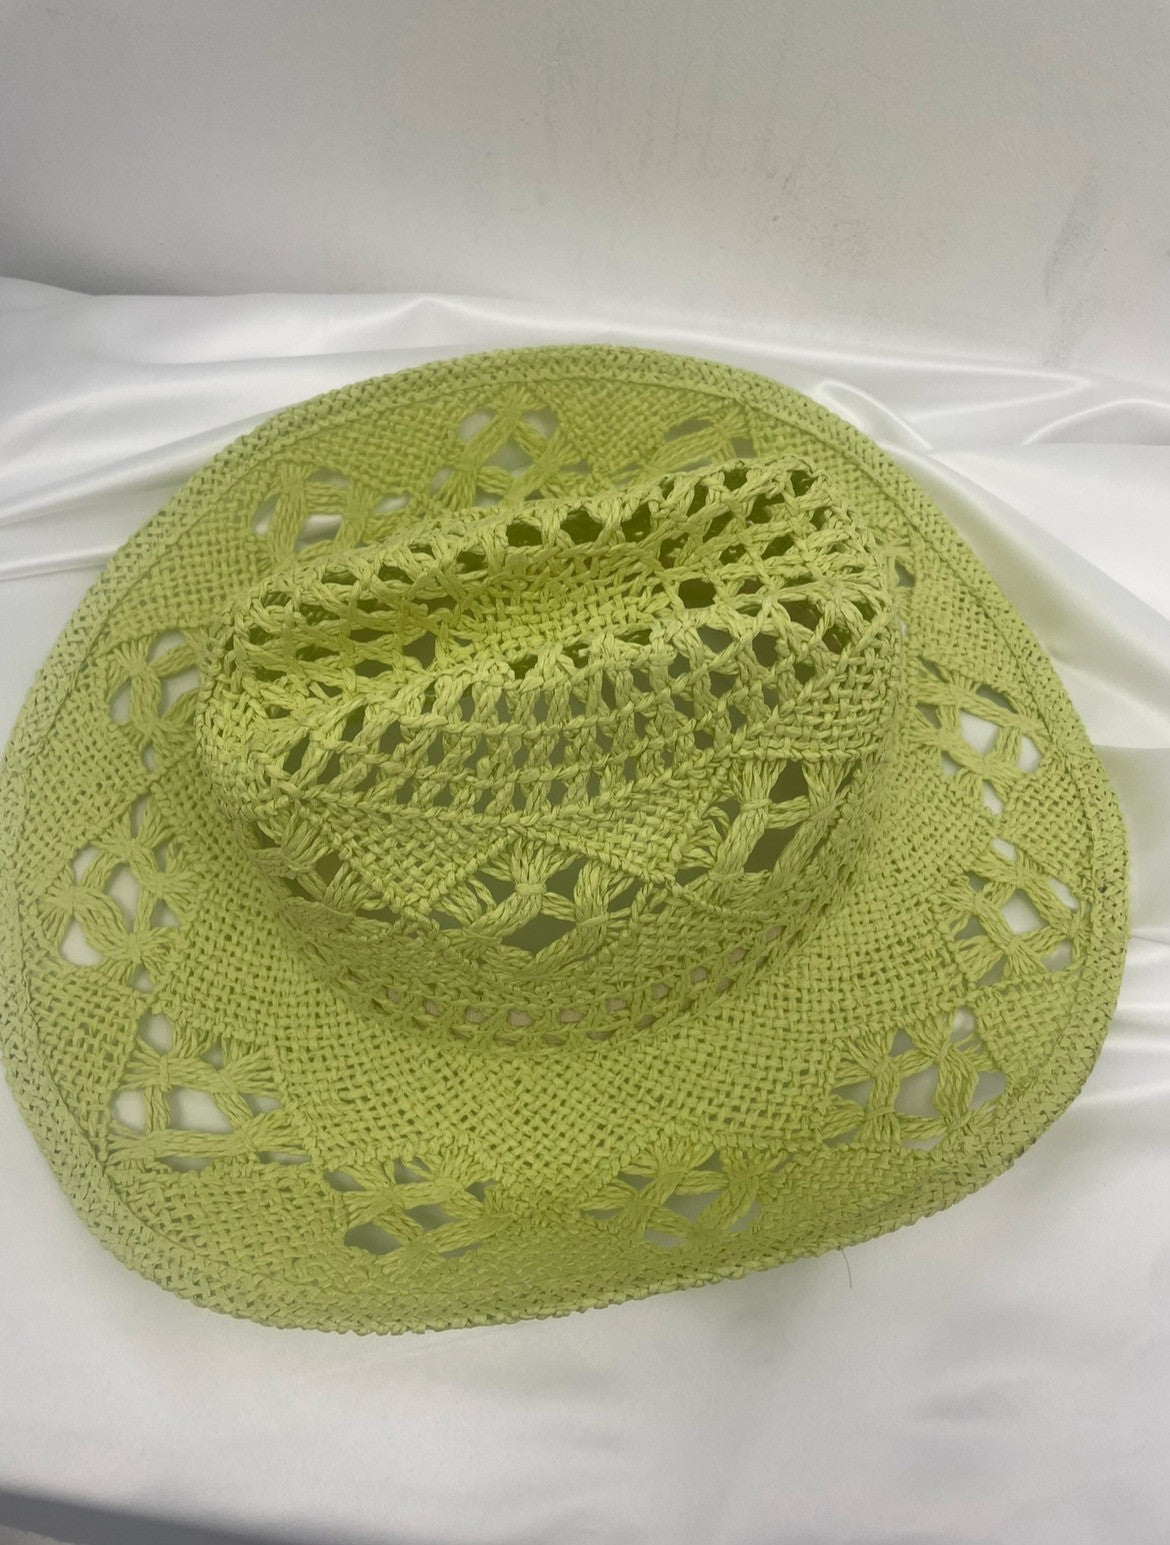 Lucy Cowboy Hats In 4 Colours